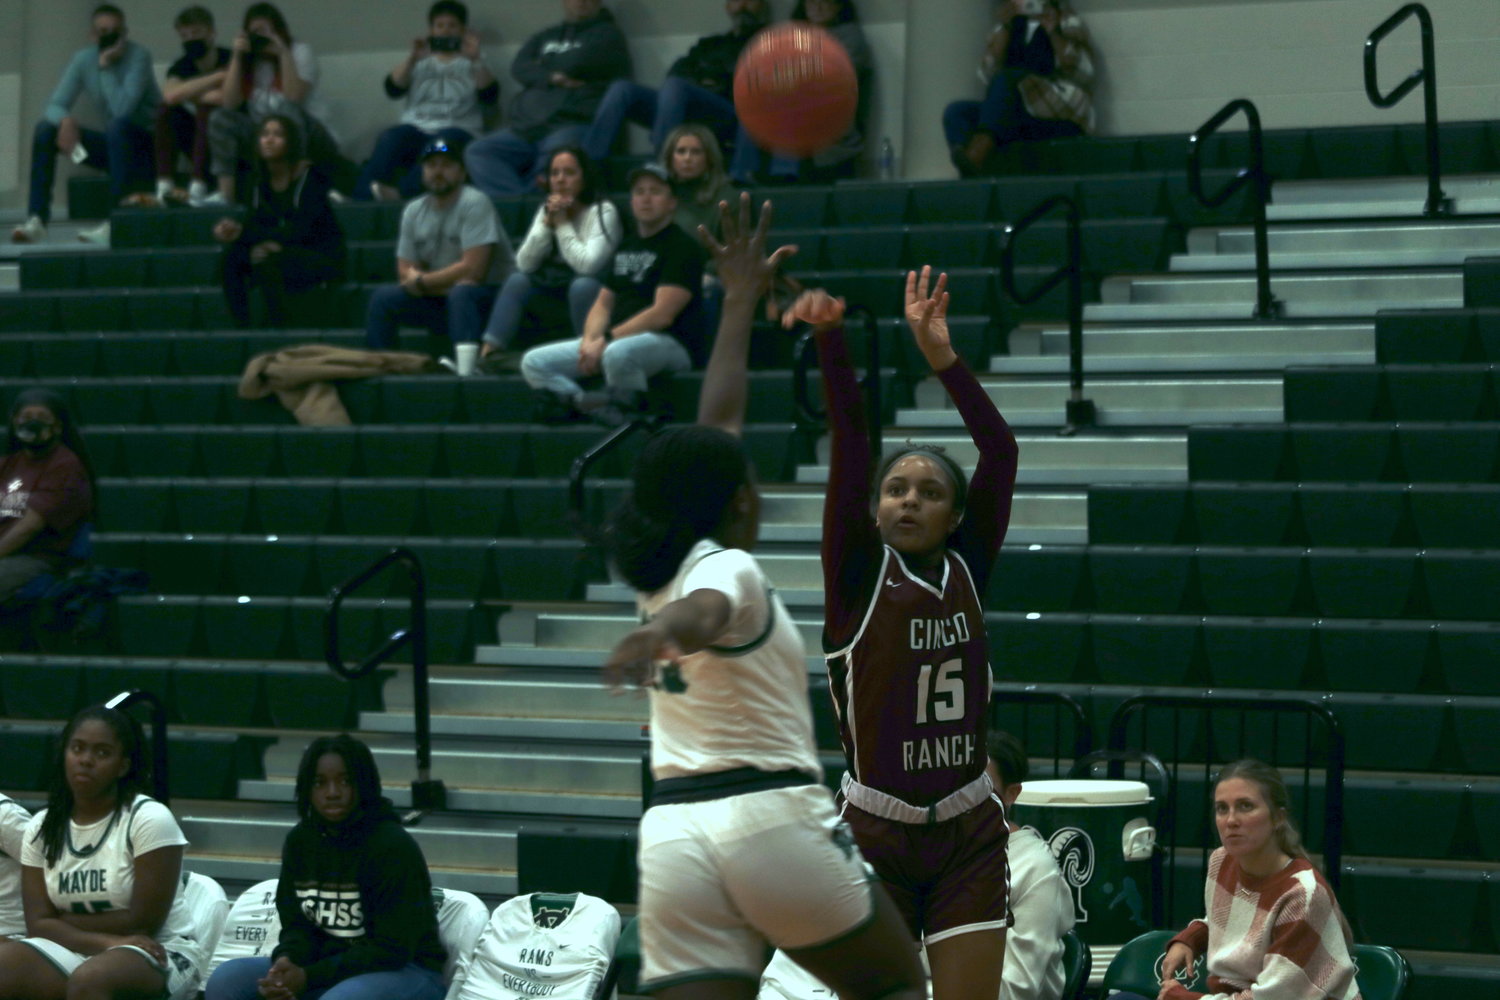 Cinco Ranch’s Danielle Williams shoots a floater during Friday’s District 19-6A game against Mayde Creek at the Mayde Creek gym.